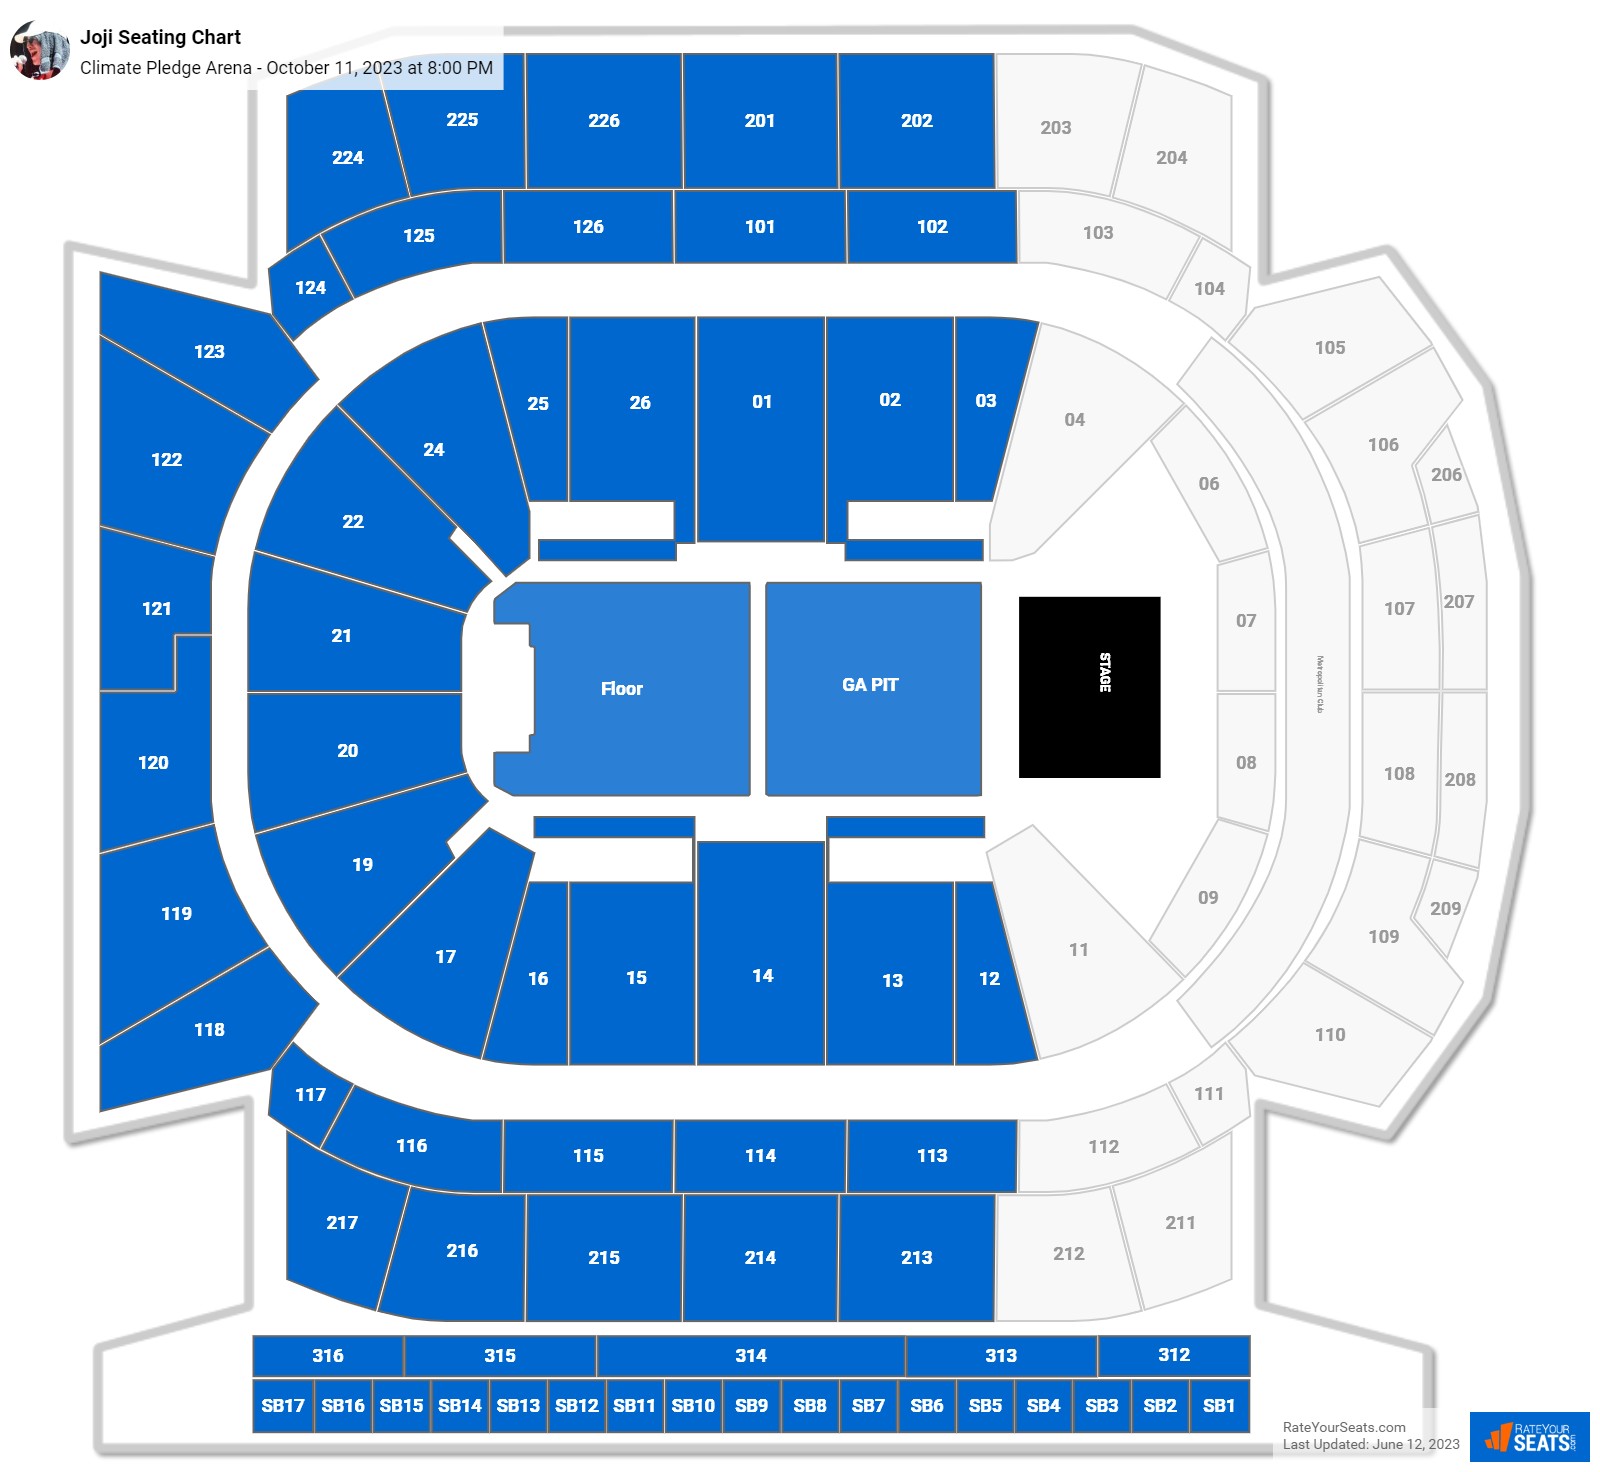 Climate Pledge Arena Concert Seating Chart - RateYourSeats.com